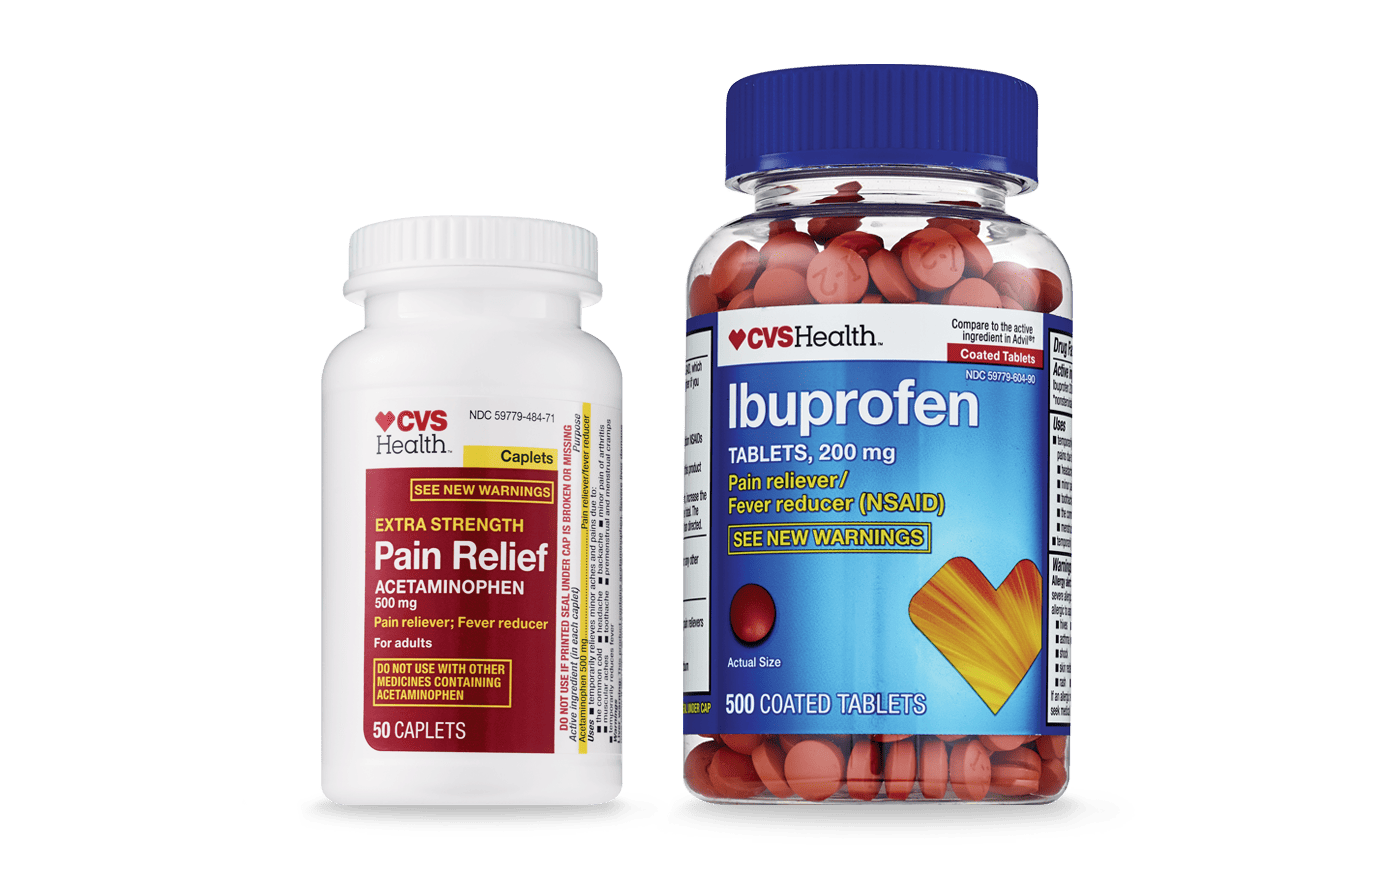 CVS Health pain relief products